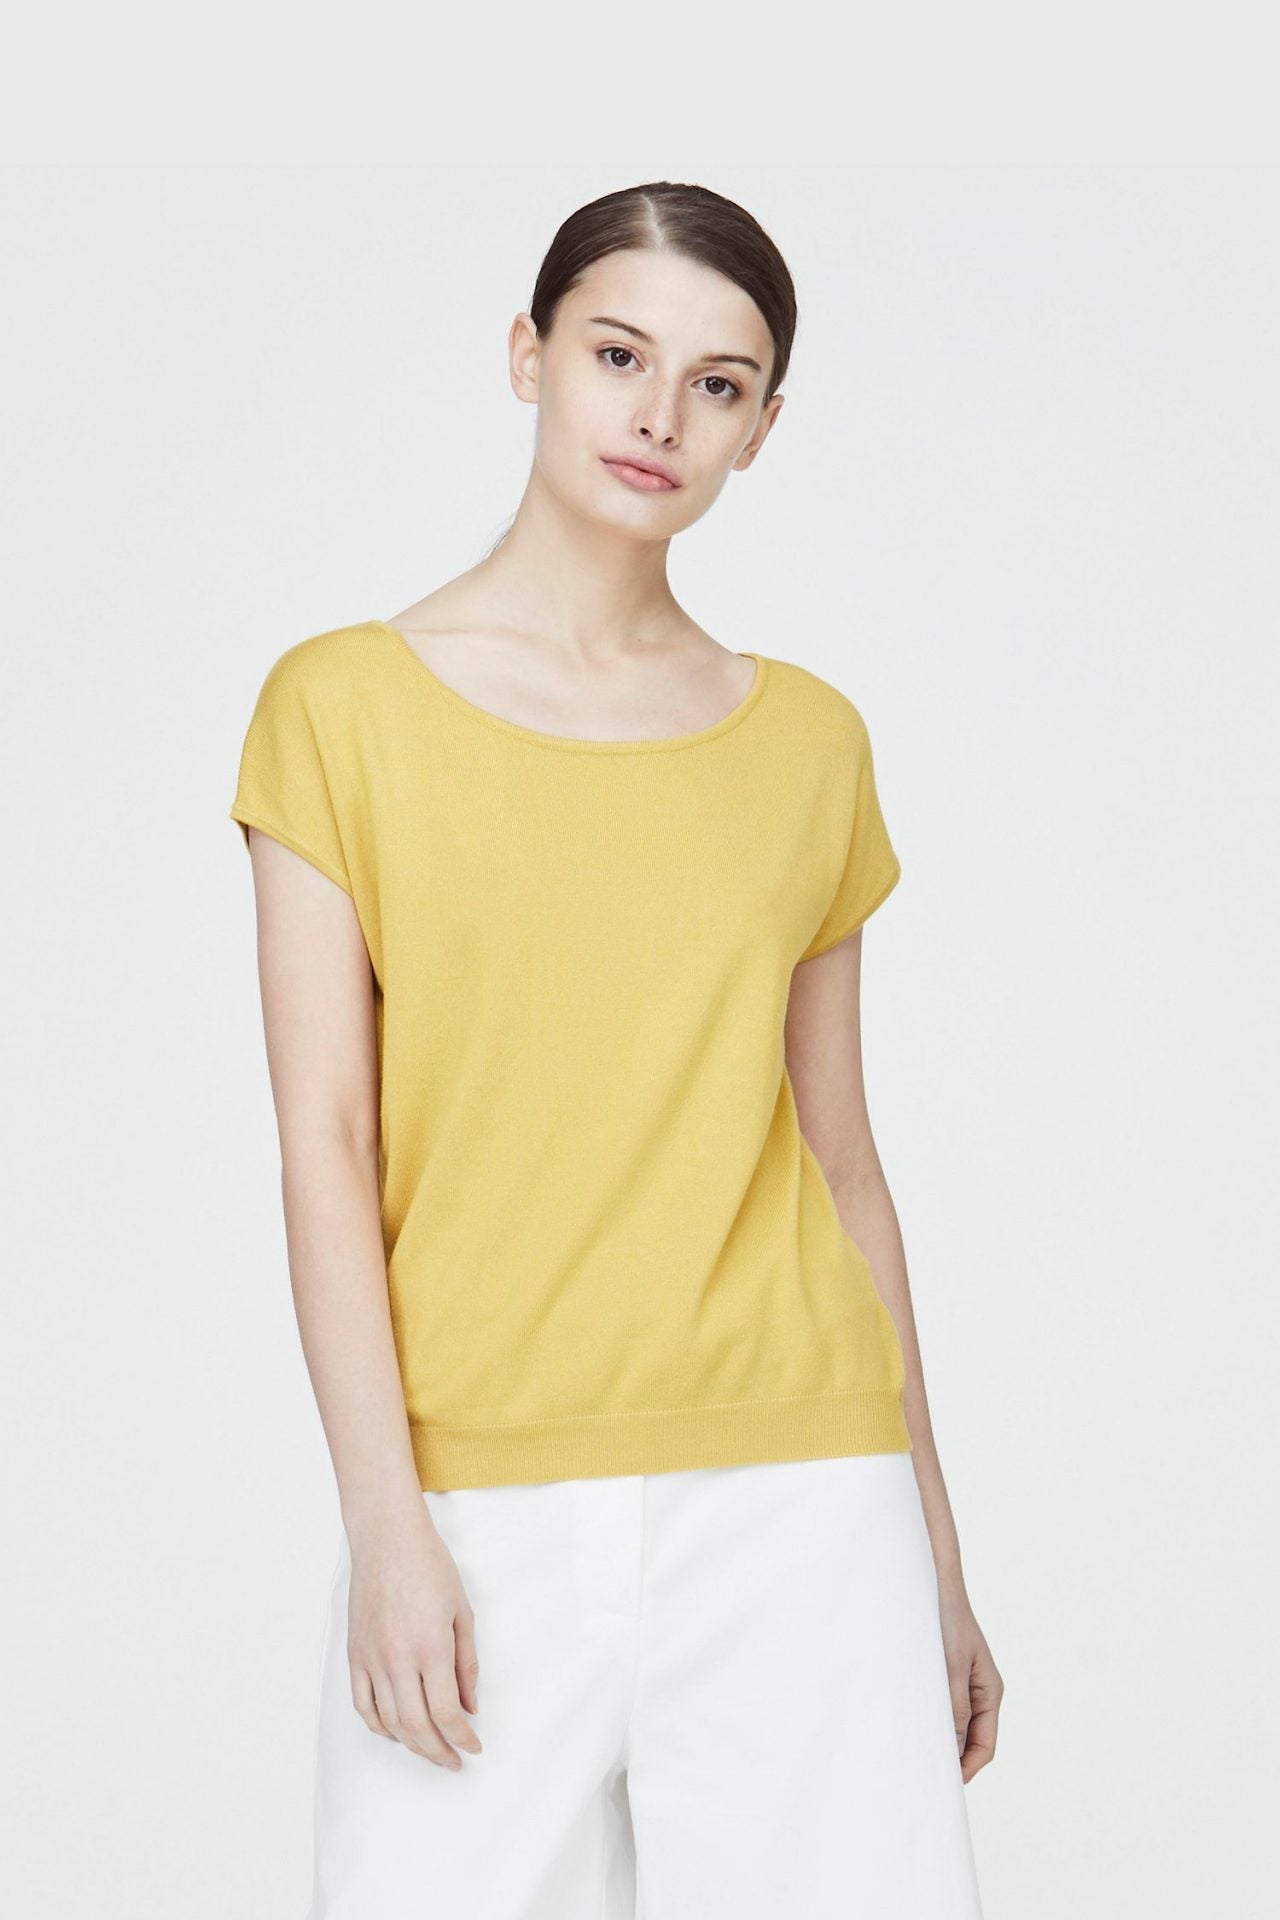 1453 YELLOW ROUND NECK KNIT TOP